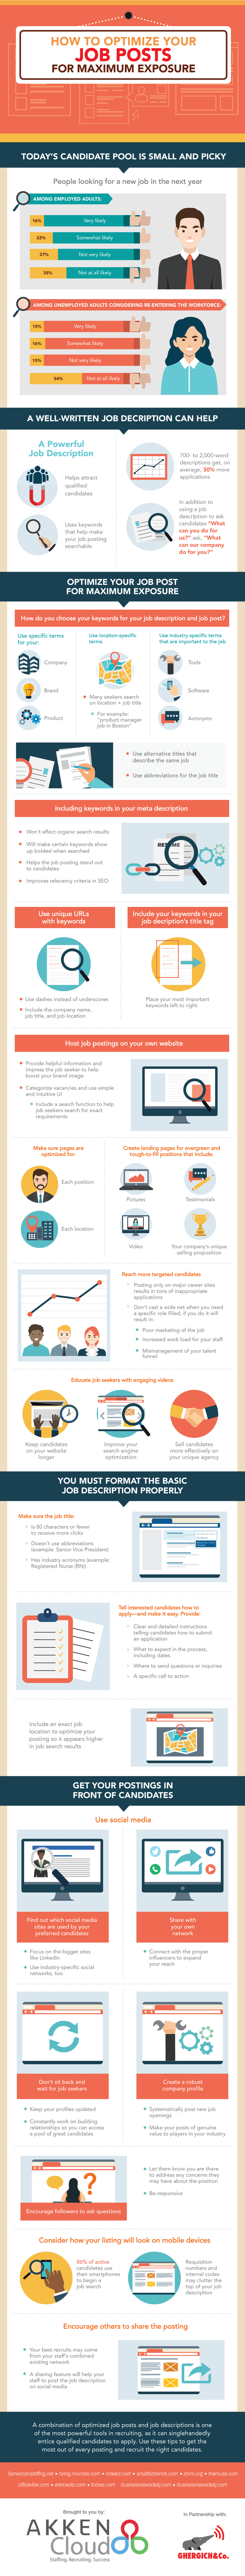 How to Optimize Your Job Posts for Maximum Exposure - #infographic